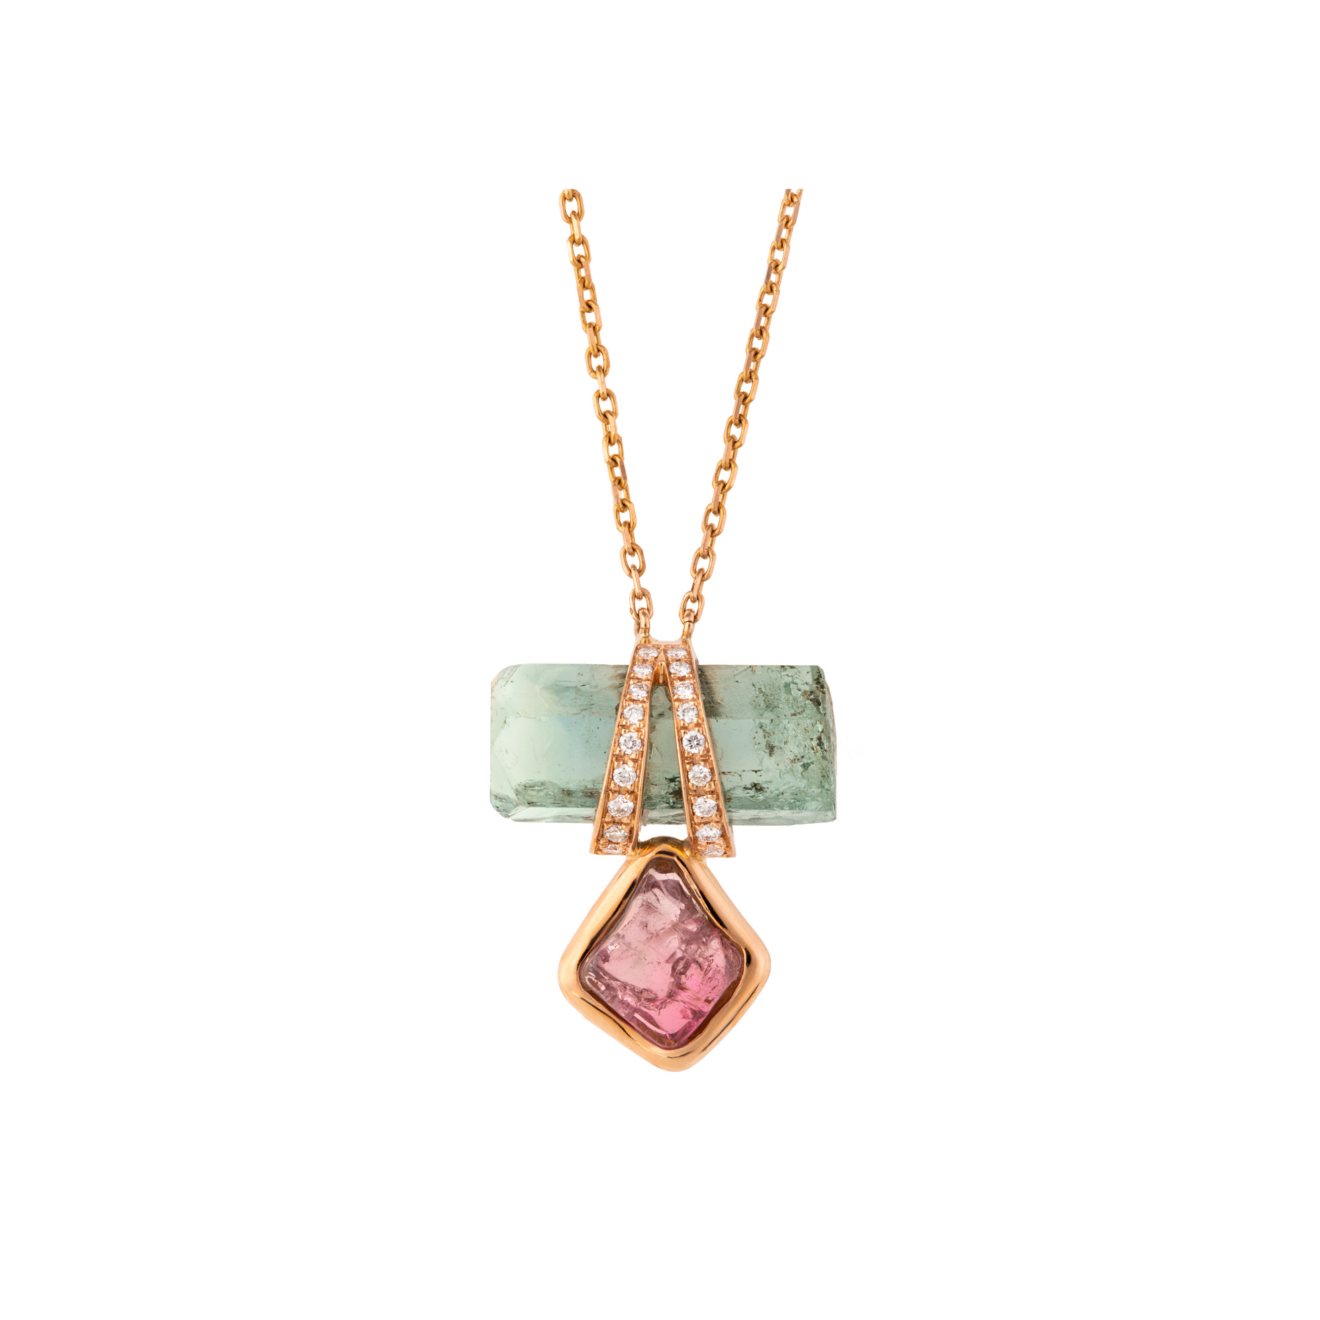 Margaret Solow - Watermelon Tourmaline Necklace – The Clay Pot